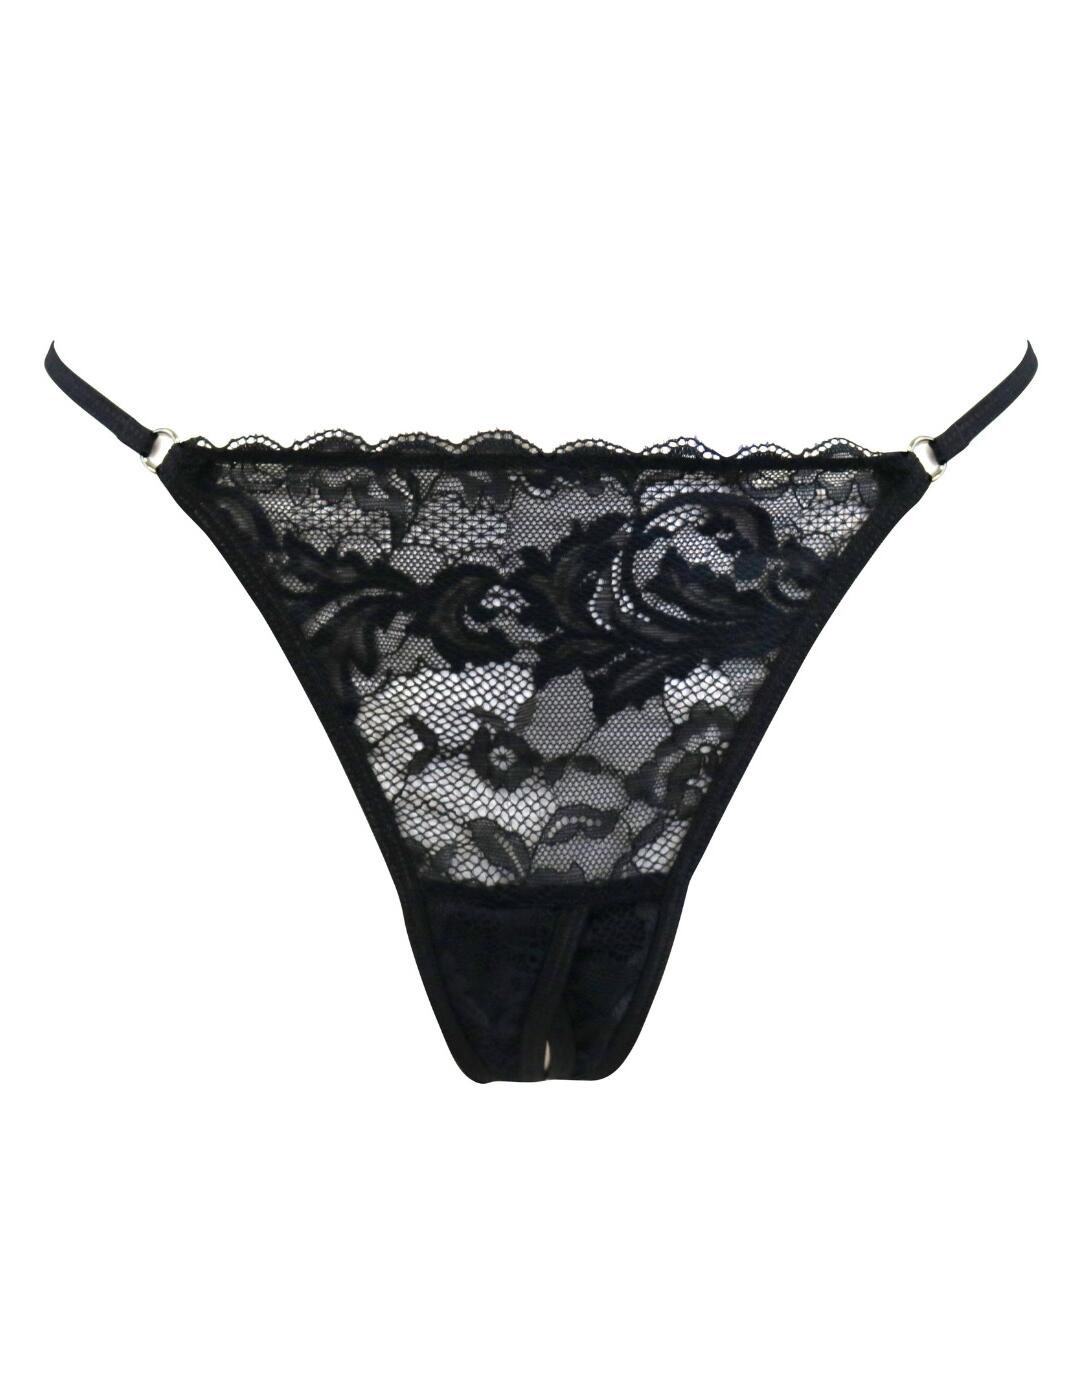 Pour Moi For Your Eyes Only Crotchless Thong - Belle Lingerie